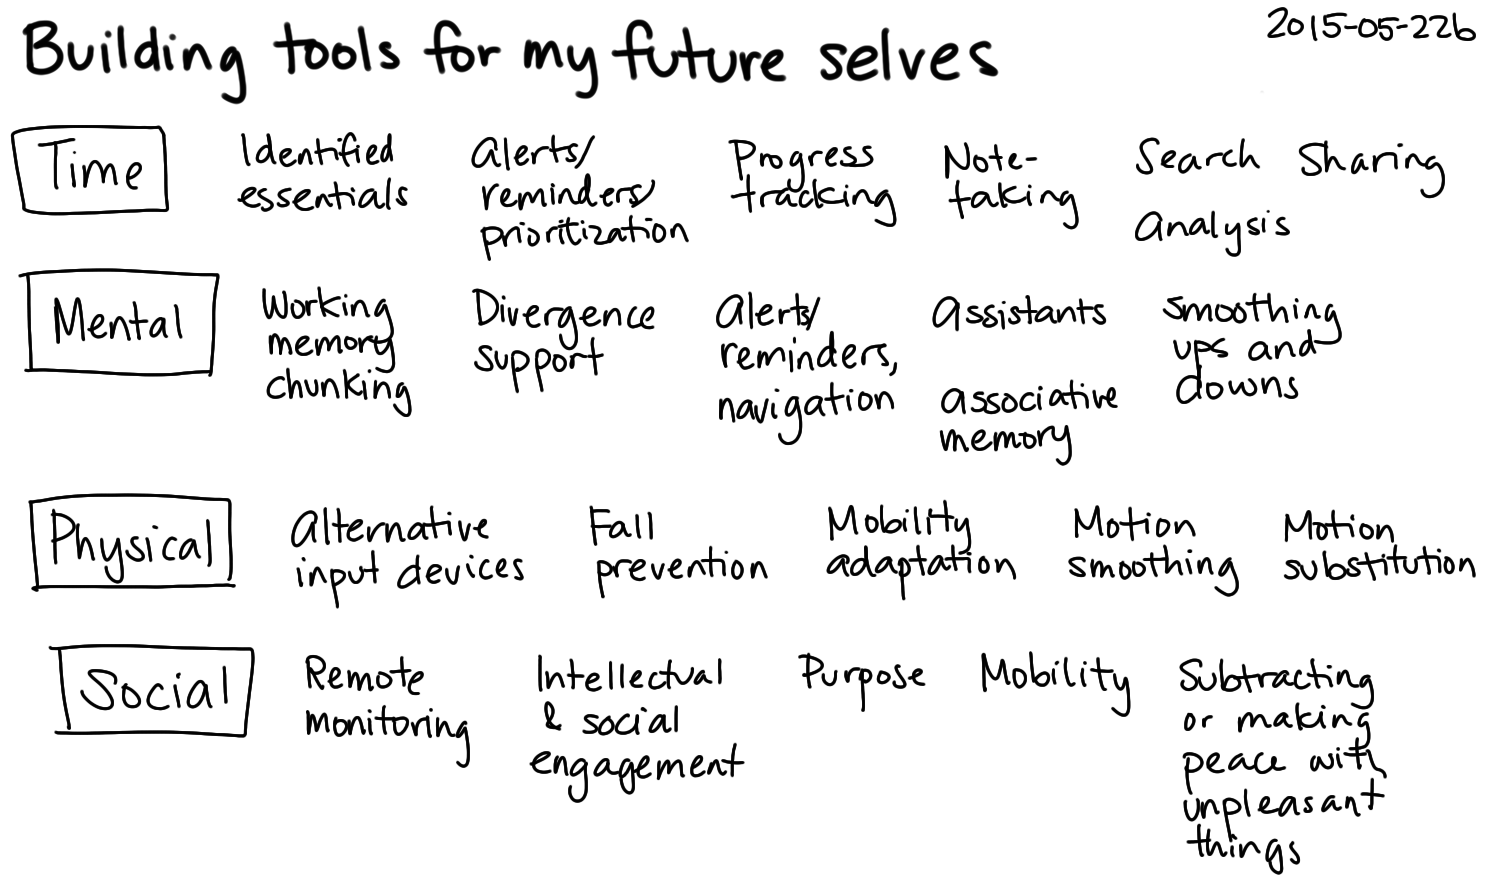 2015-05-22b Building tools for my future selves -- index card #future-tools #plans.png